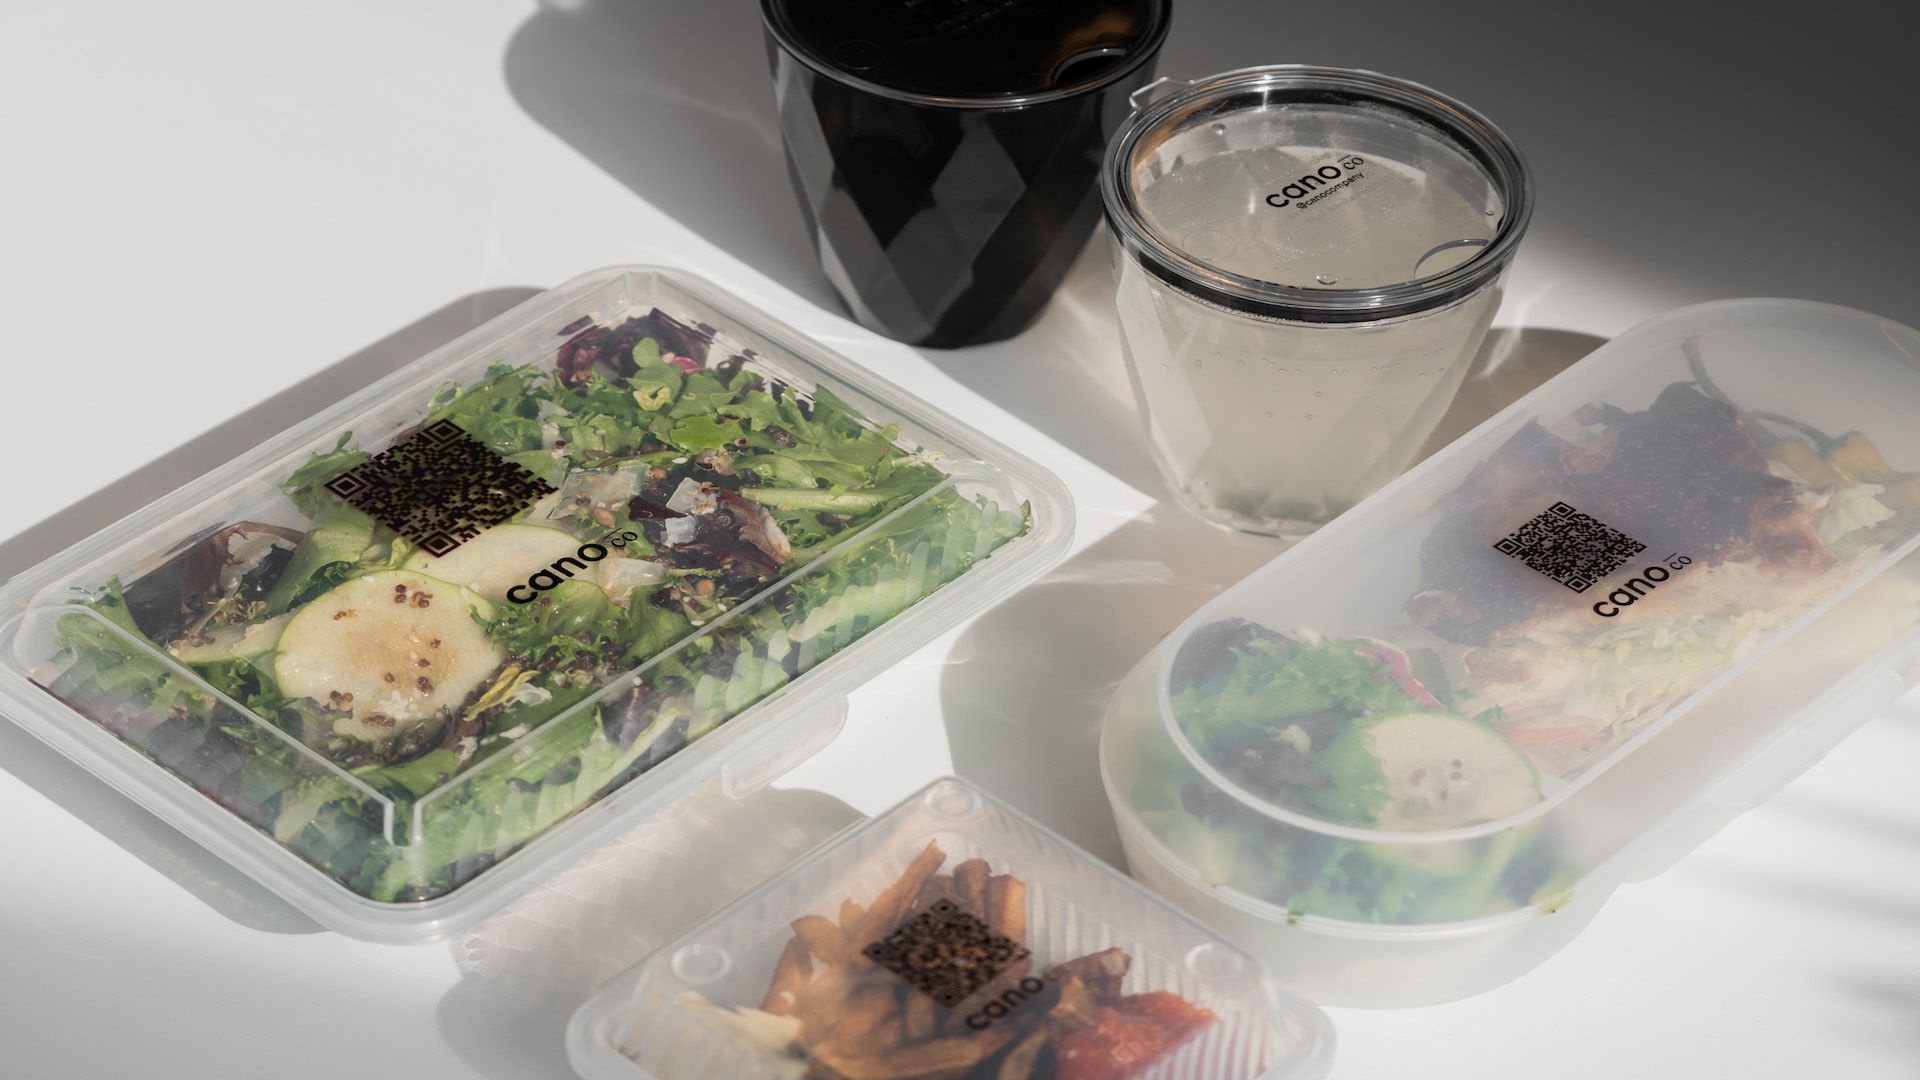 Can a reusable container program help solve America's takeout